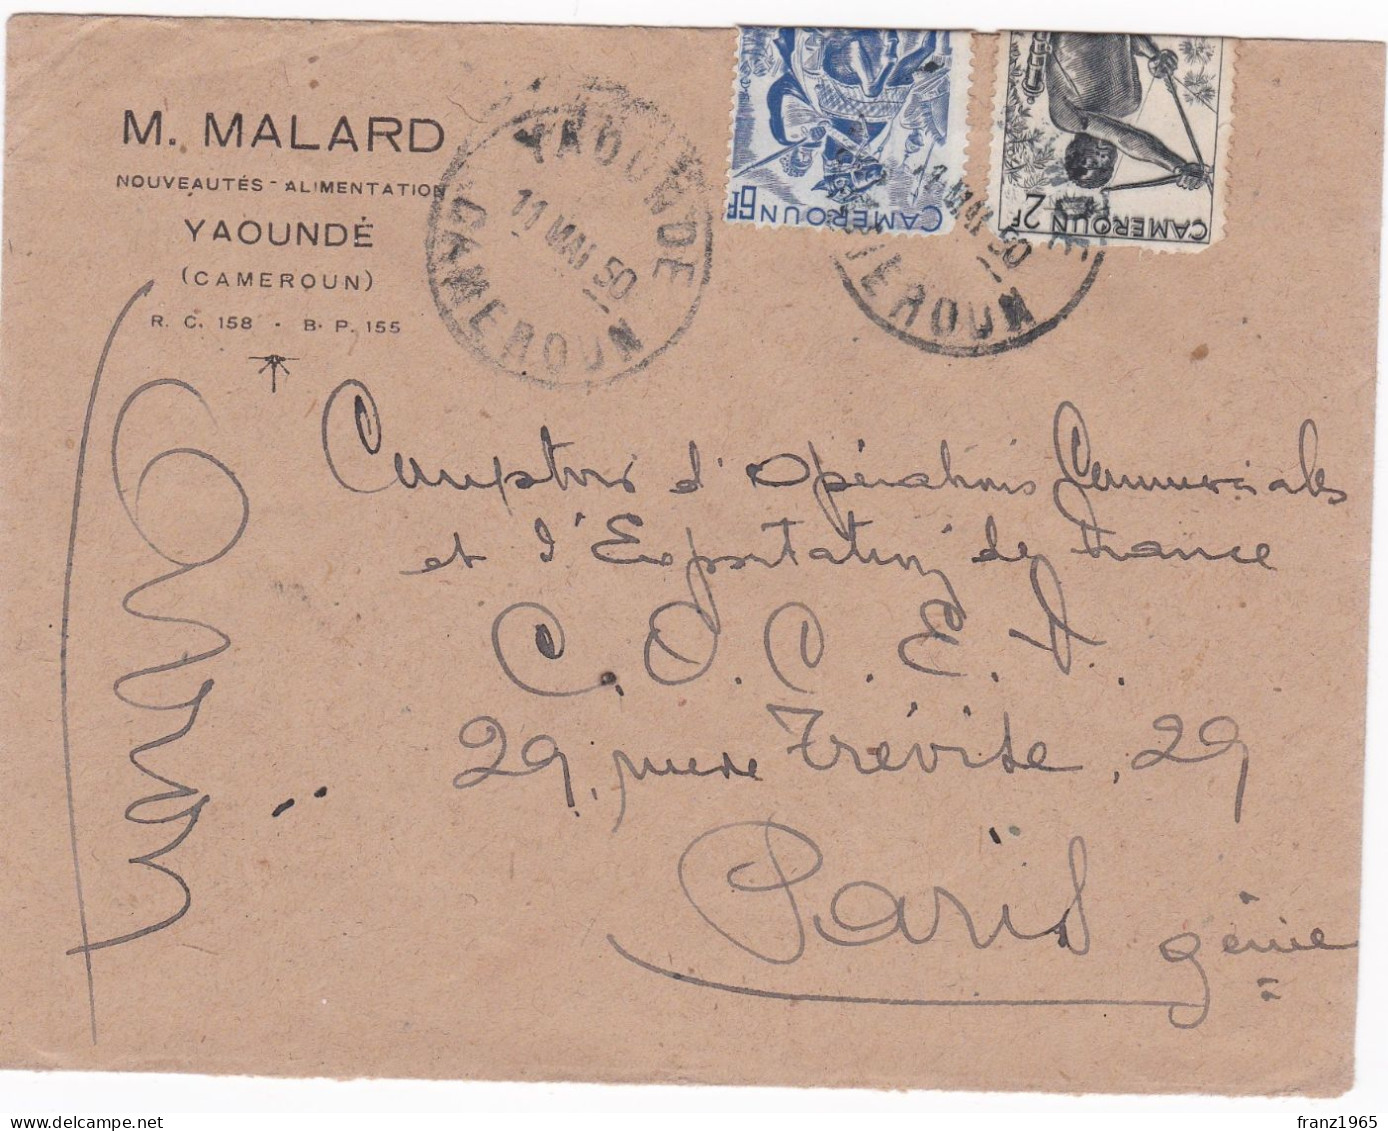 From Camerun To France - 1950 - Airmail